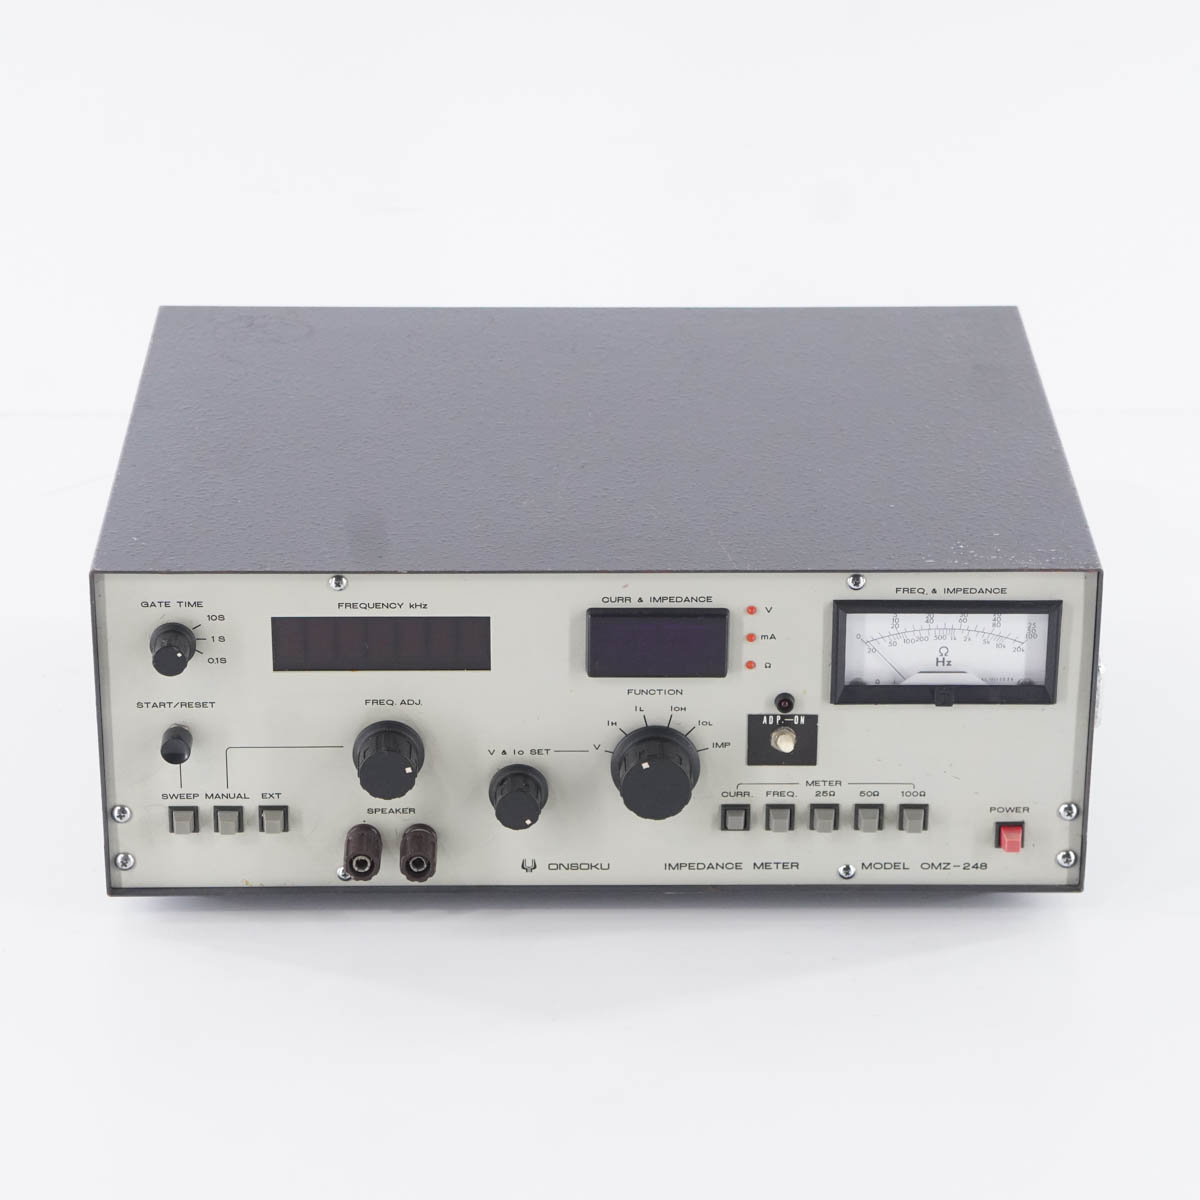 DW]USED 8日保証 ONSOKU OMZ-248 IMPEDANCE METER インピーダンス 